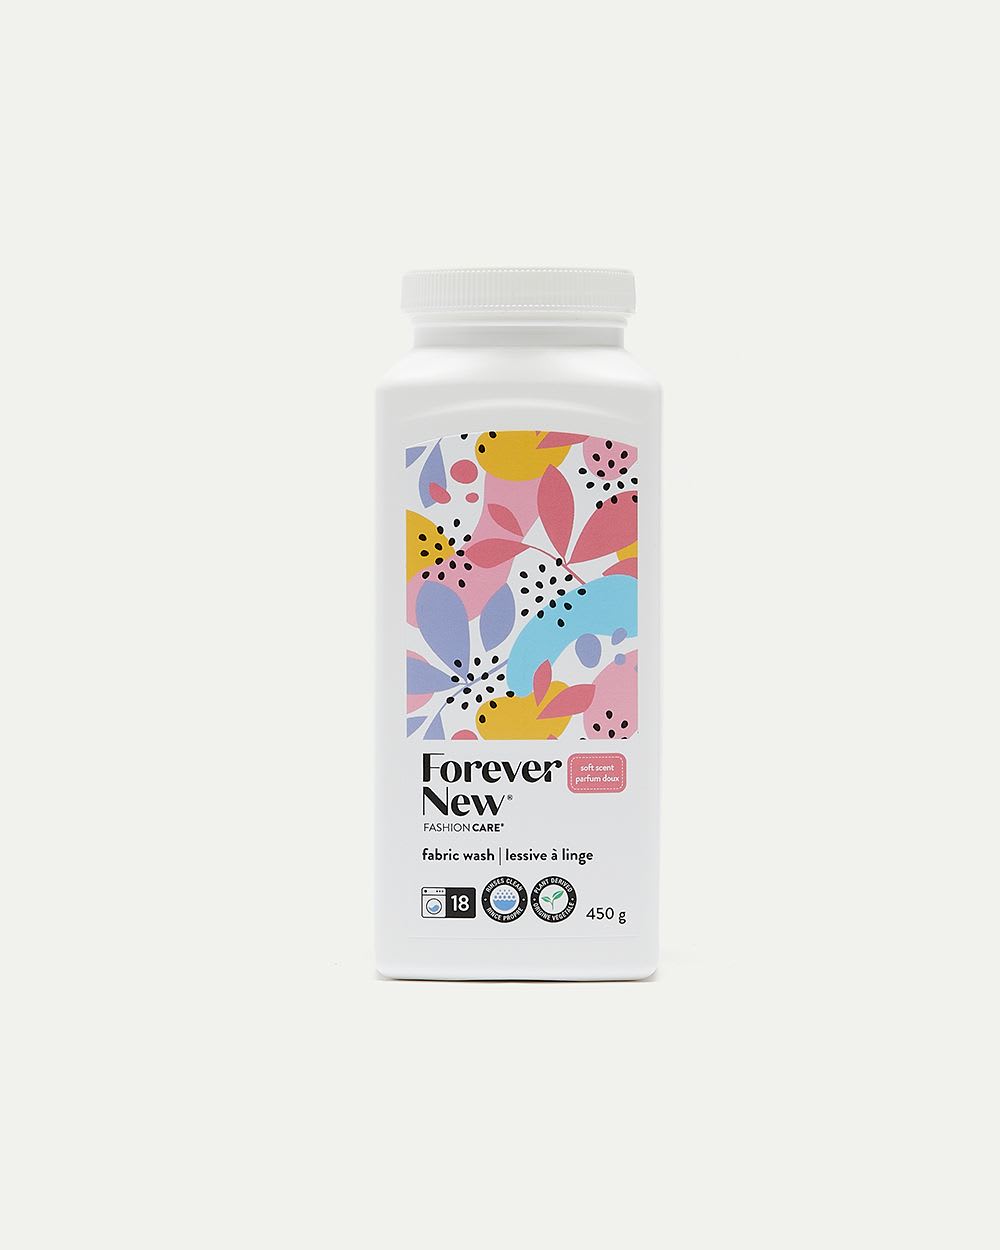 FOREVER NEW POWDER FABRIC WASH SOFT SCENT - 450G